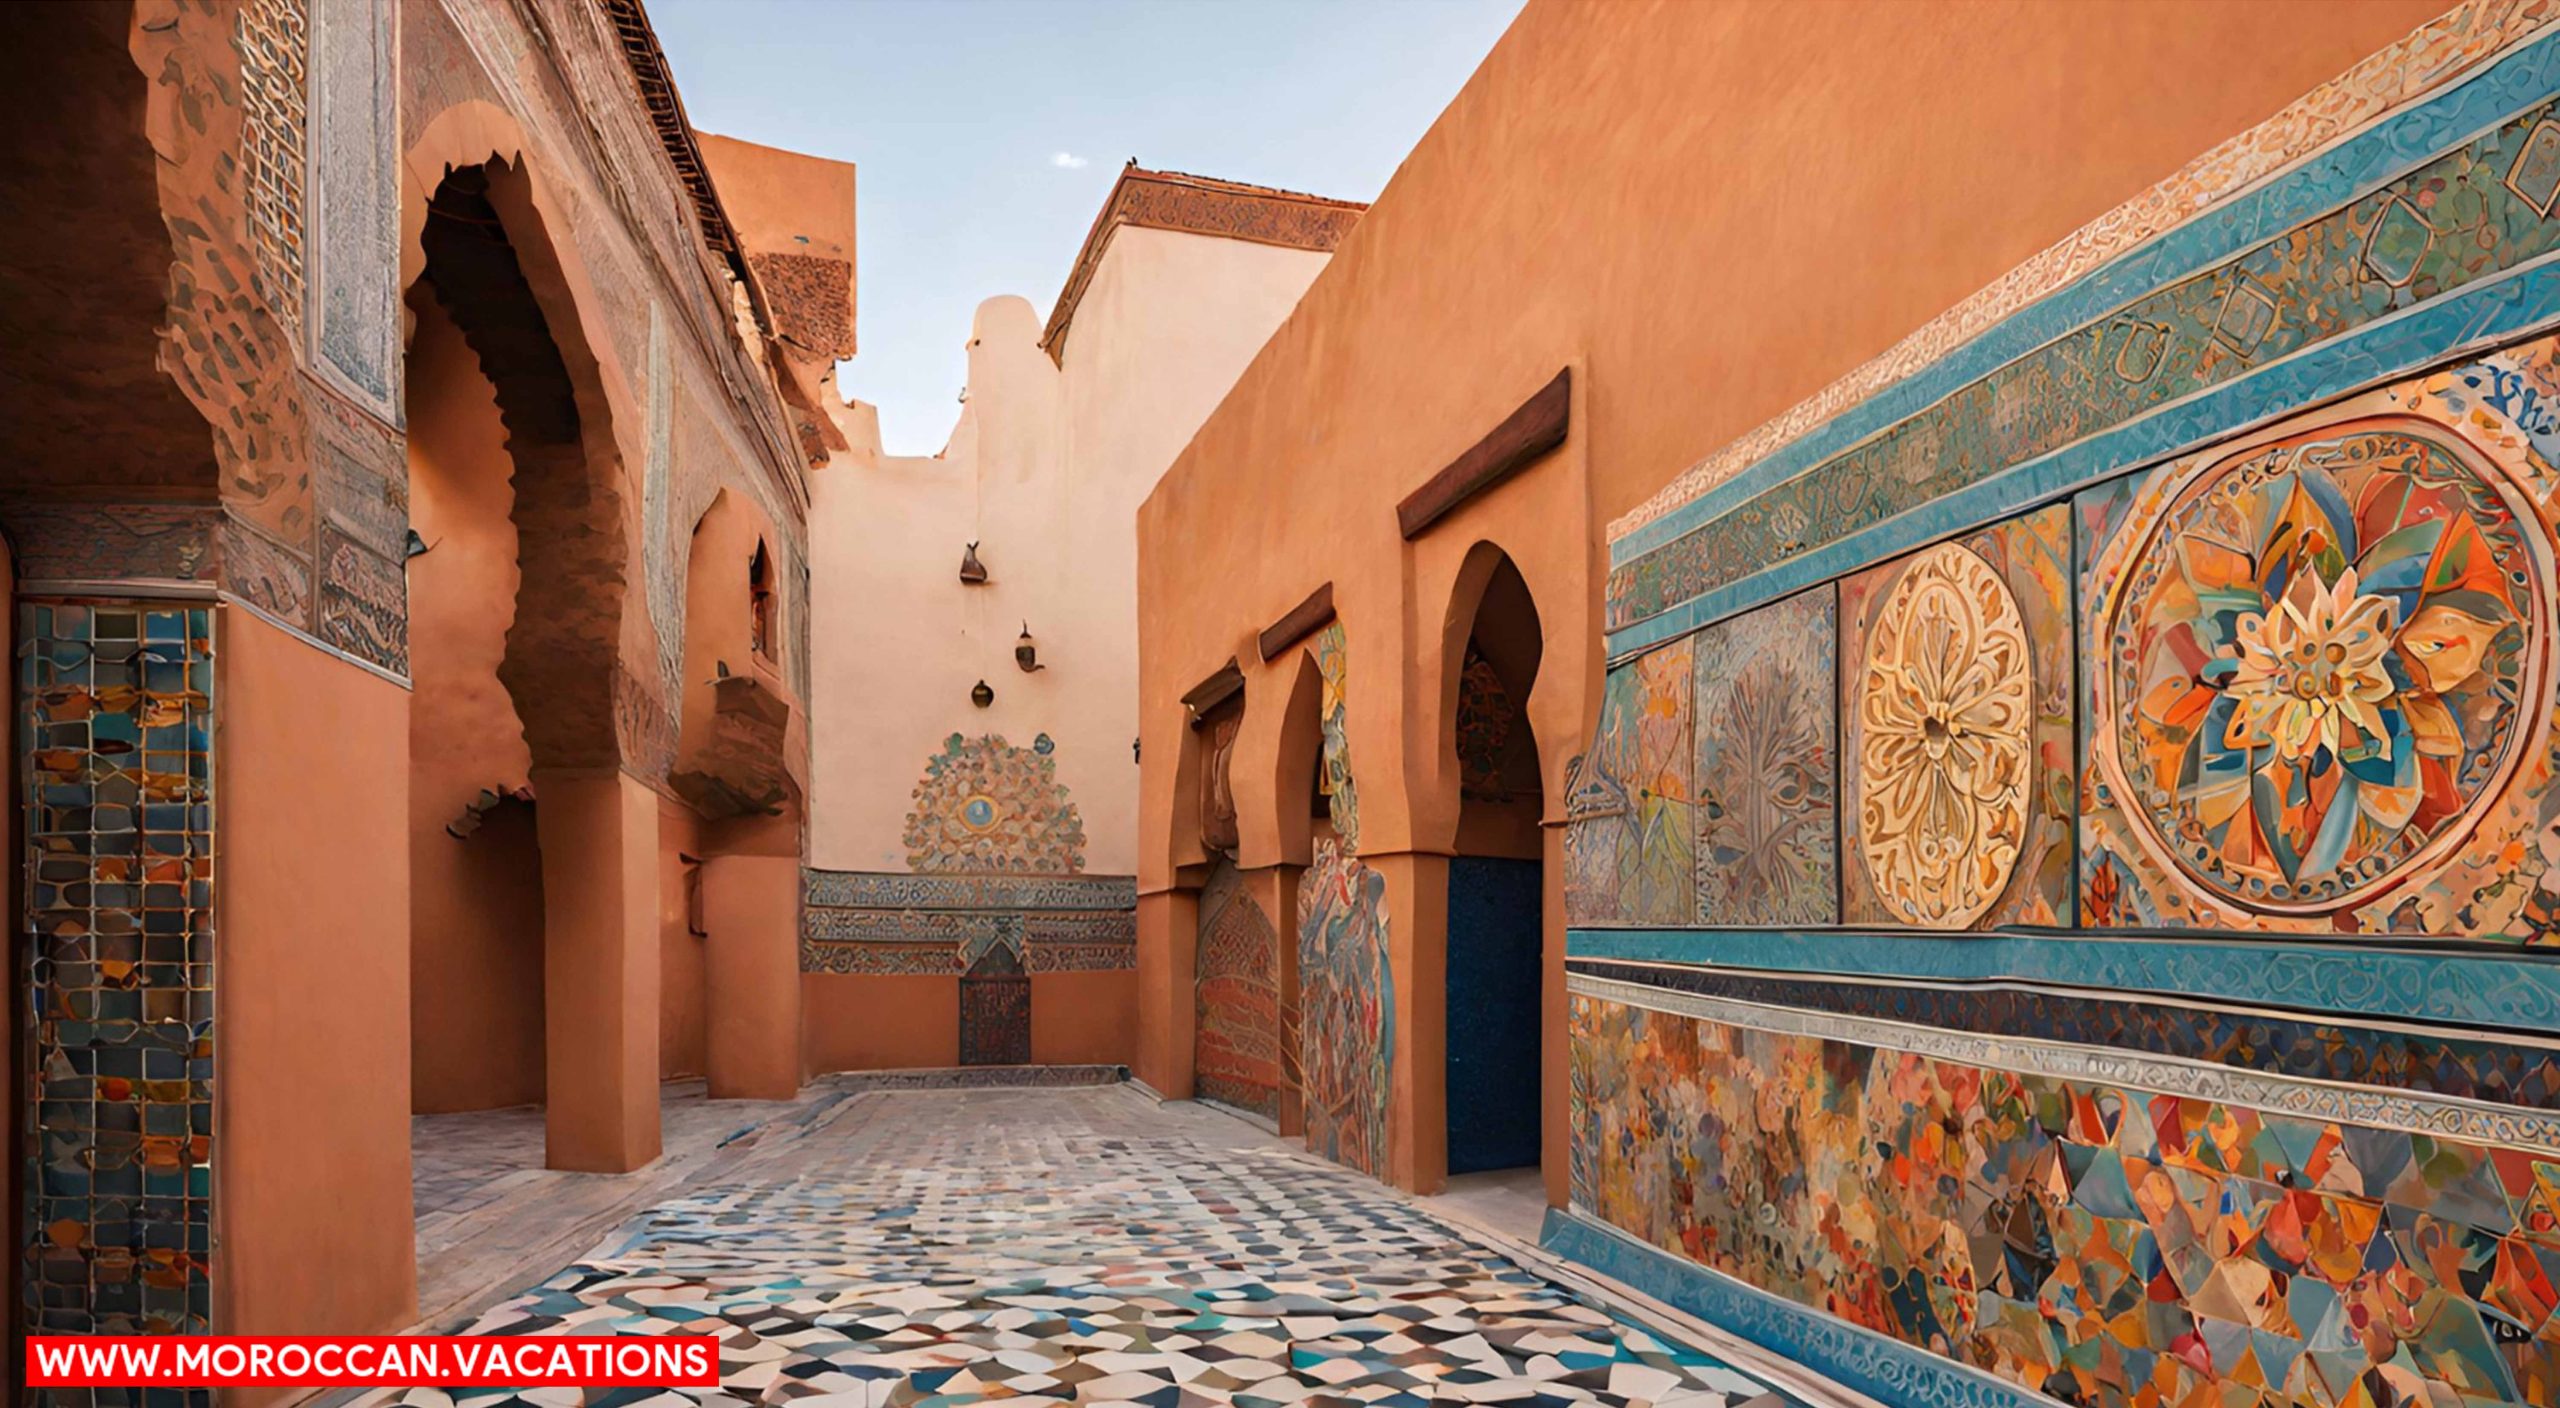 A vibrant mural in the heart of Marrakech, depicting a fusion of traditional Moroccan motifs.